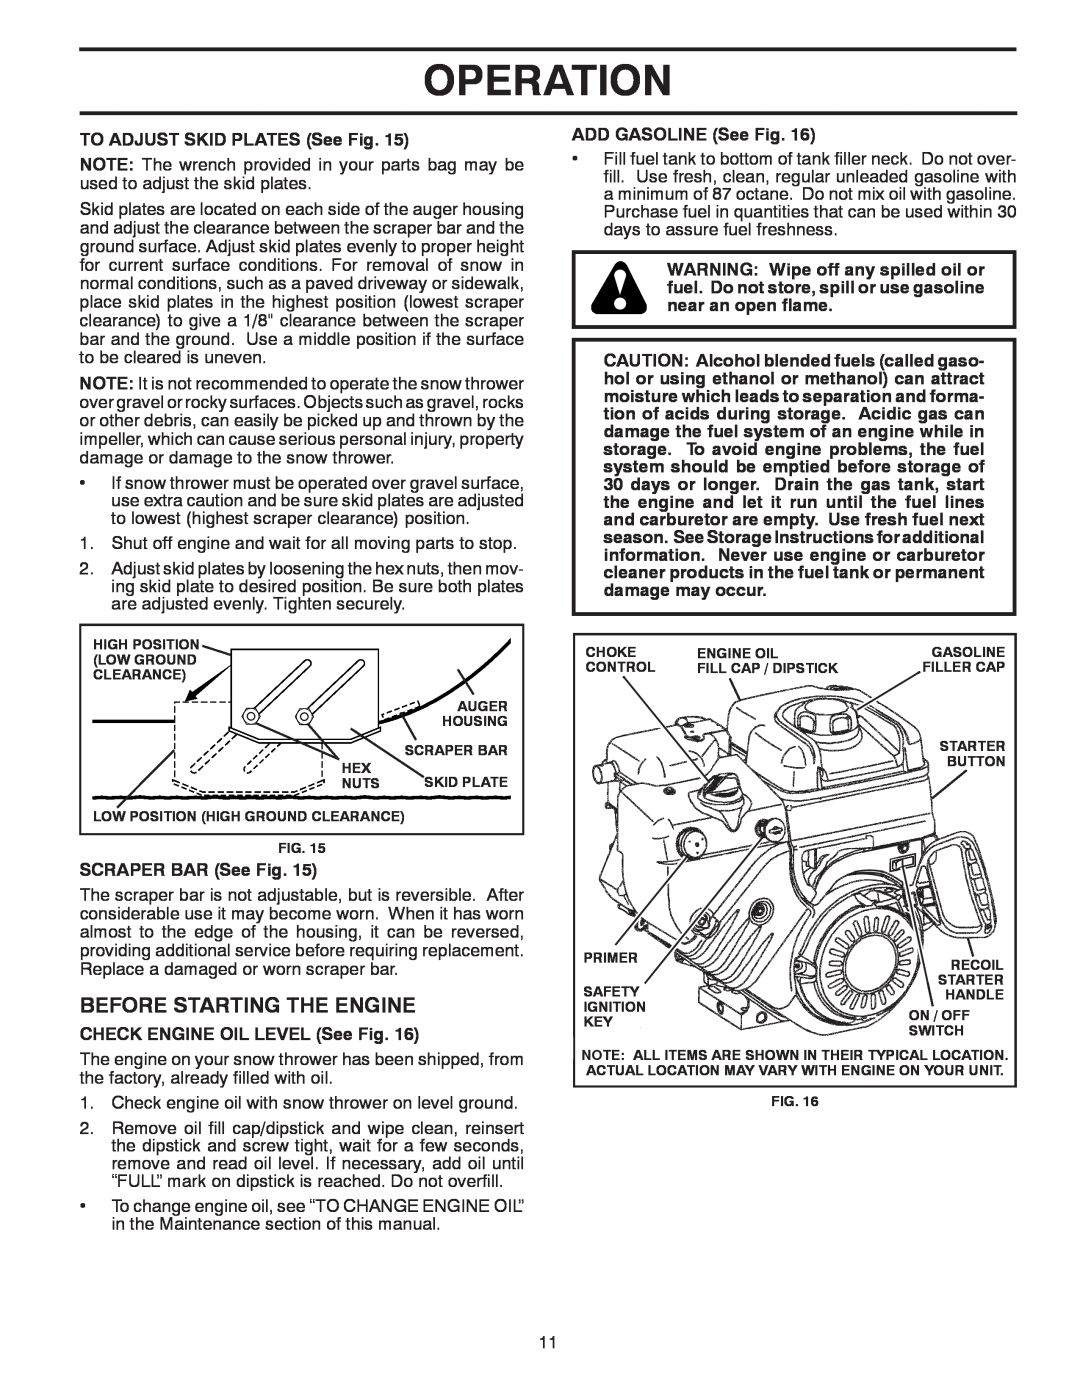 Poulan 96194000503 owner manual Before Starting The Engine, Operation, TO ADJUST SKID PLATES See Fig, SCRAPER BAR See Fig 